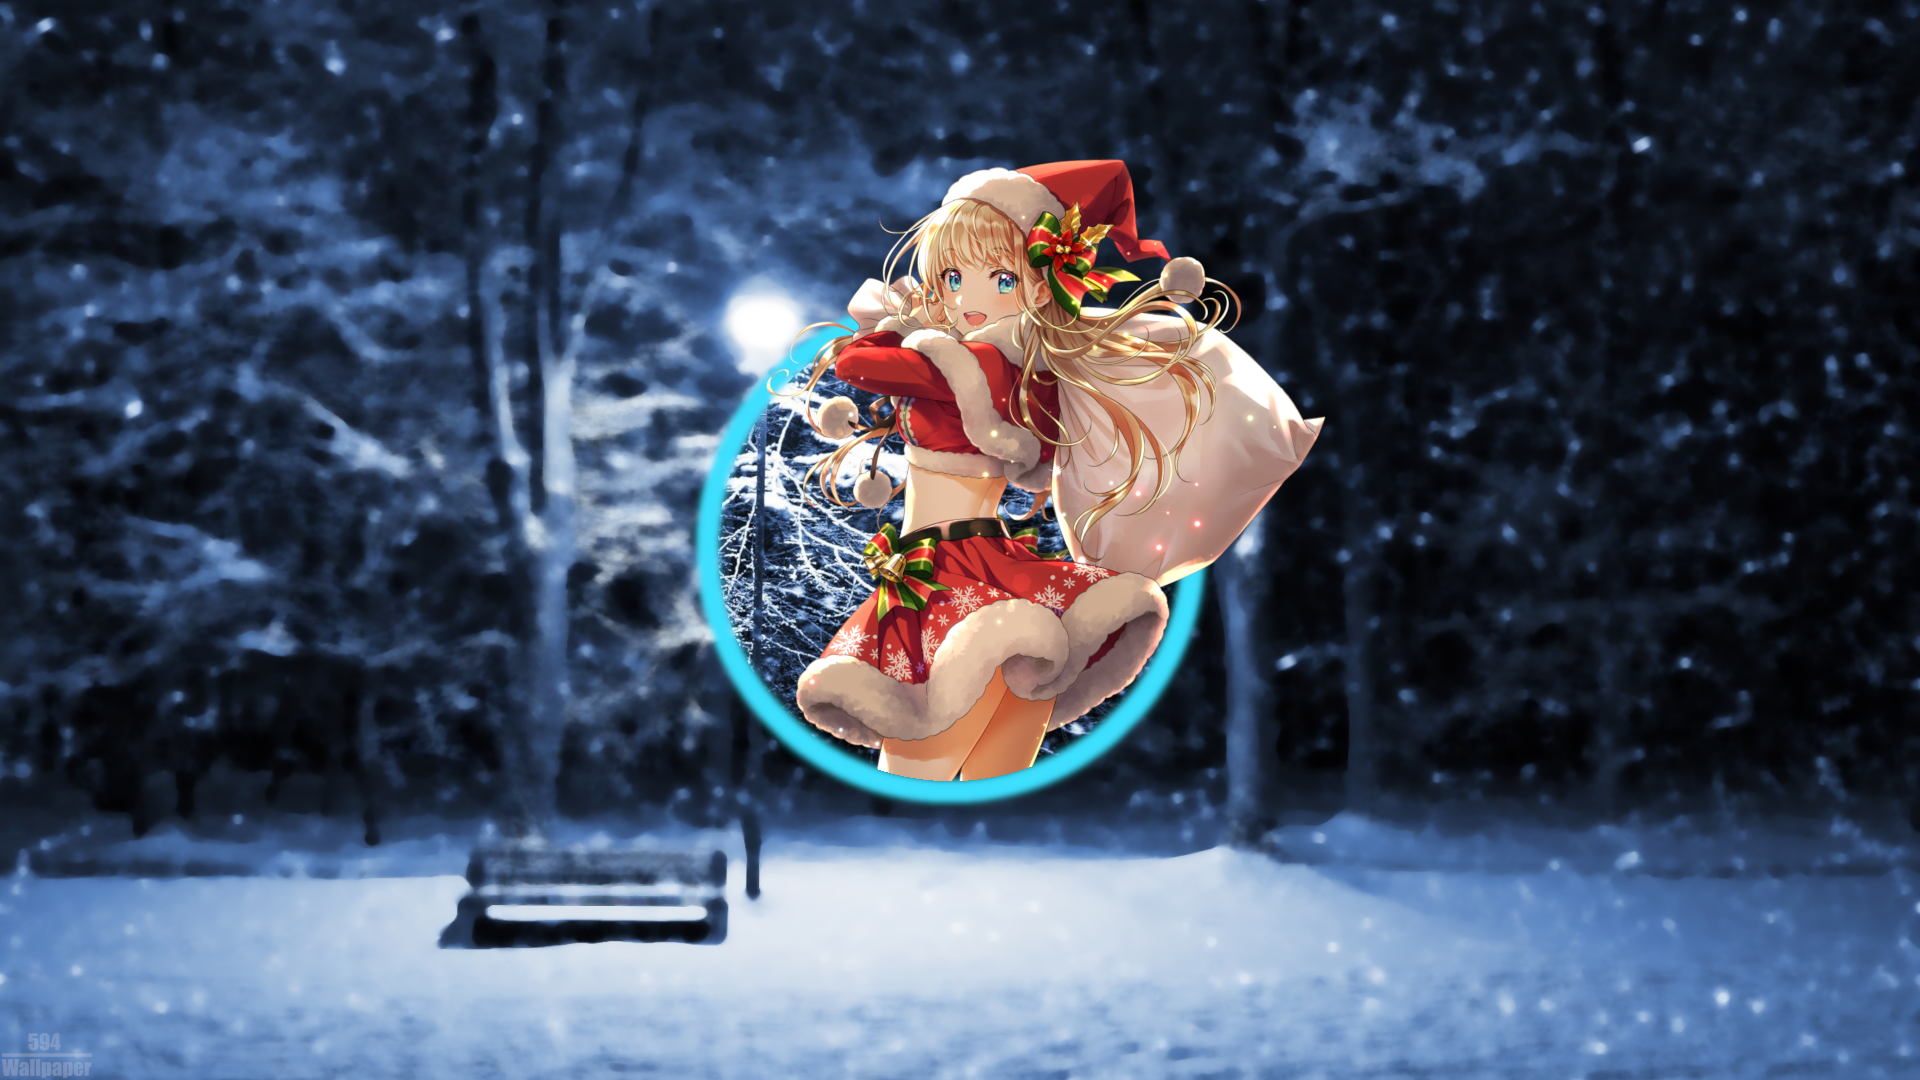 Christmas, Picture In Picture, Anime Girls, Snow, Blurred, Winter Gallery HD Wallpaper